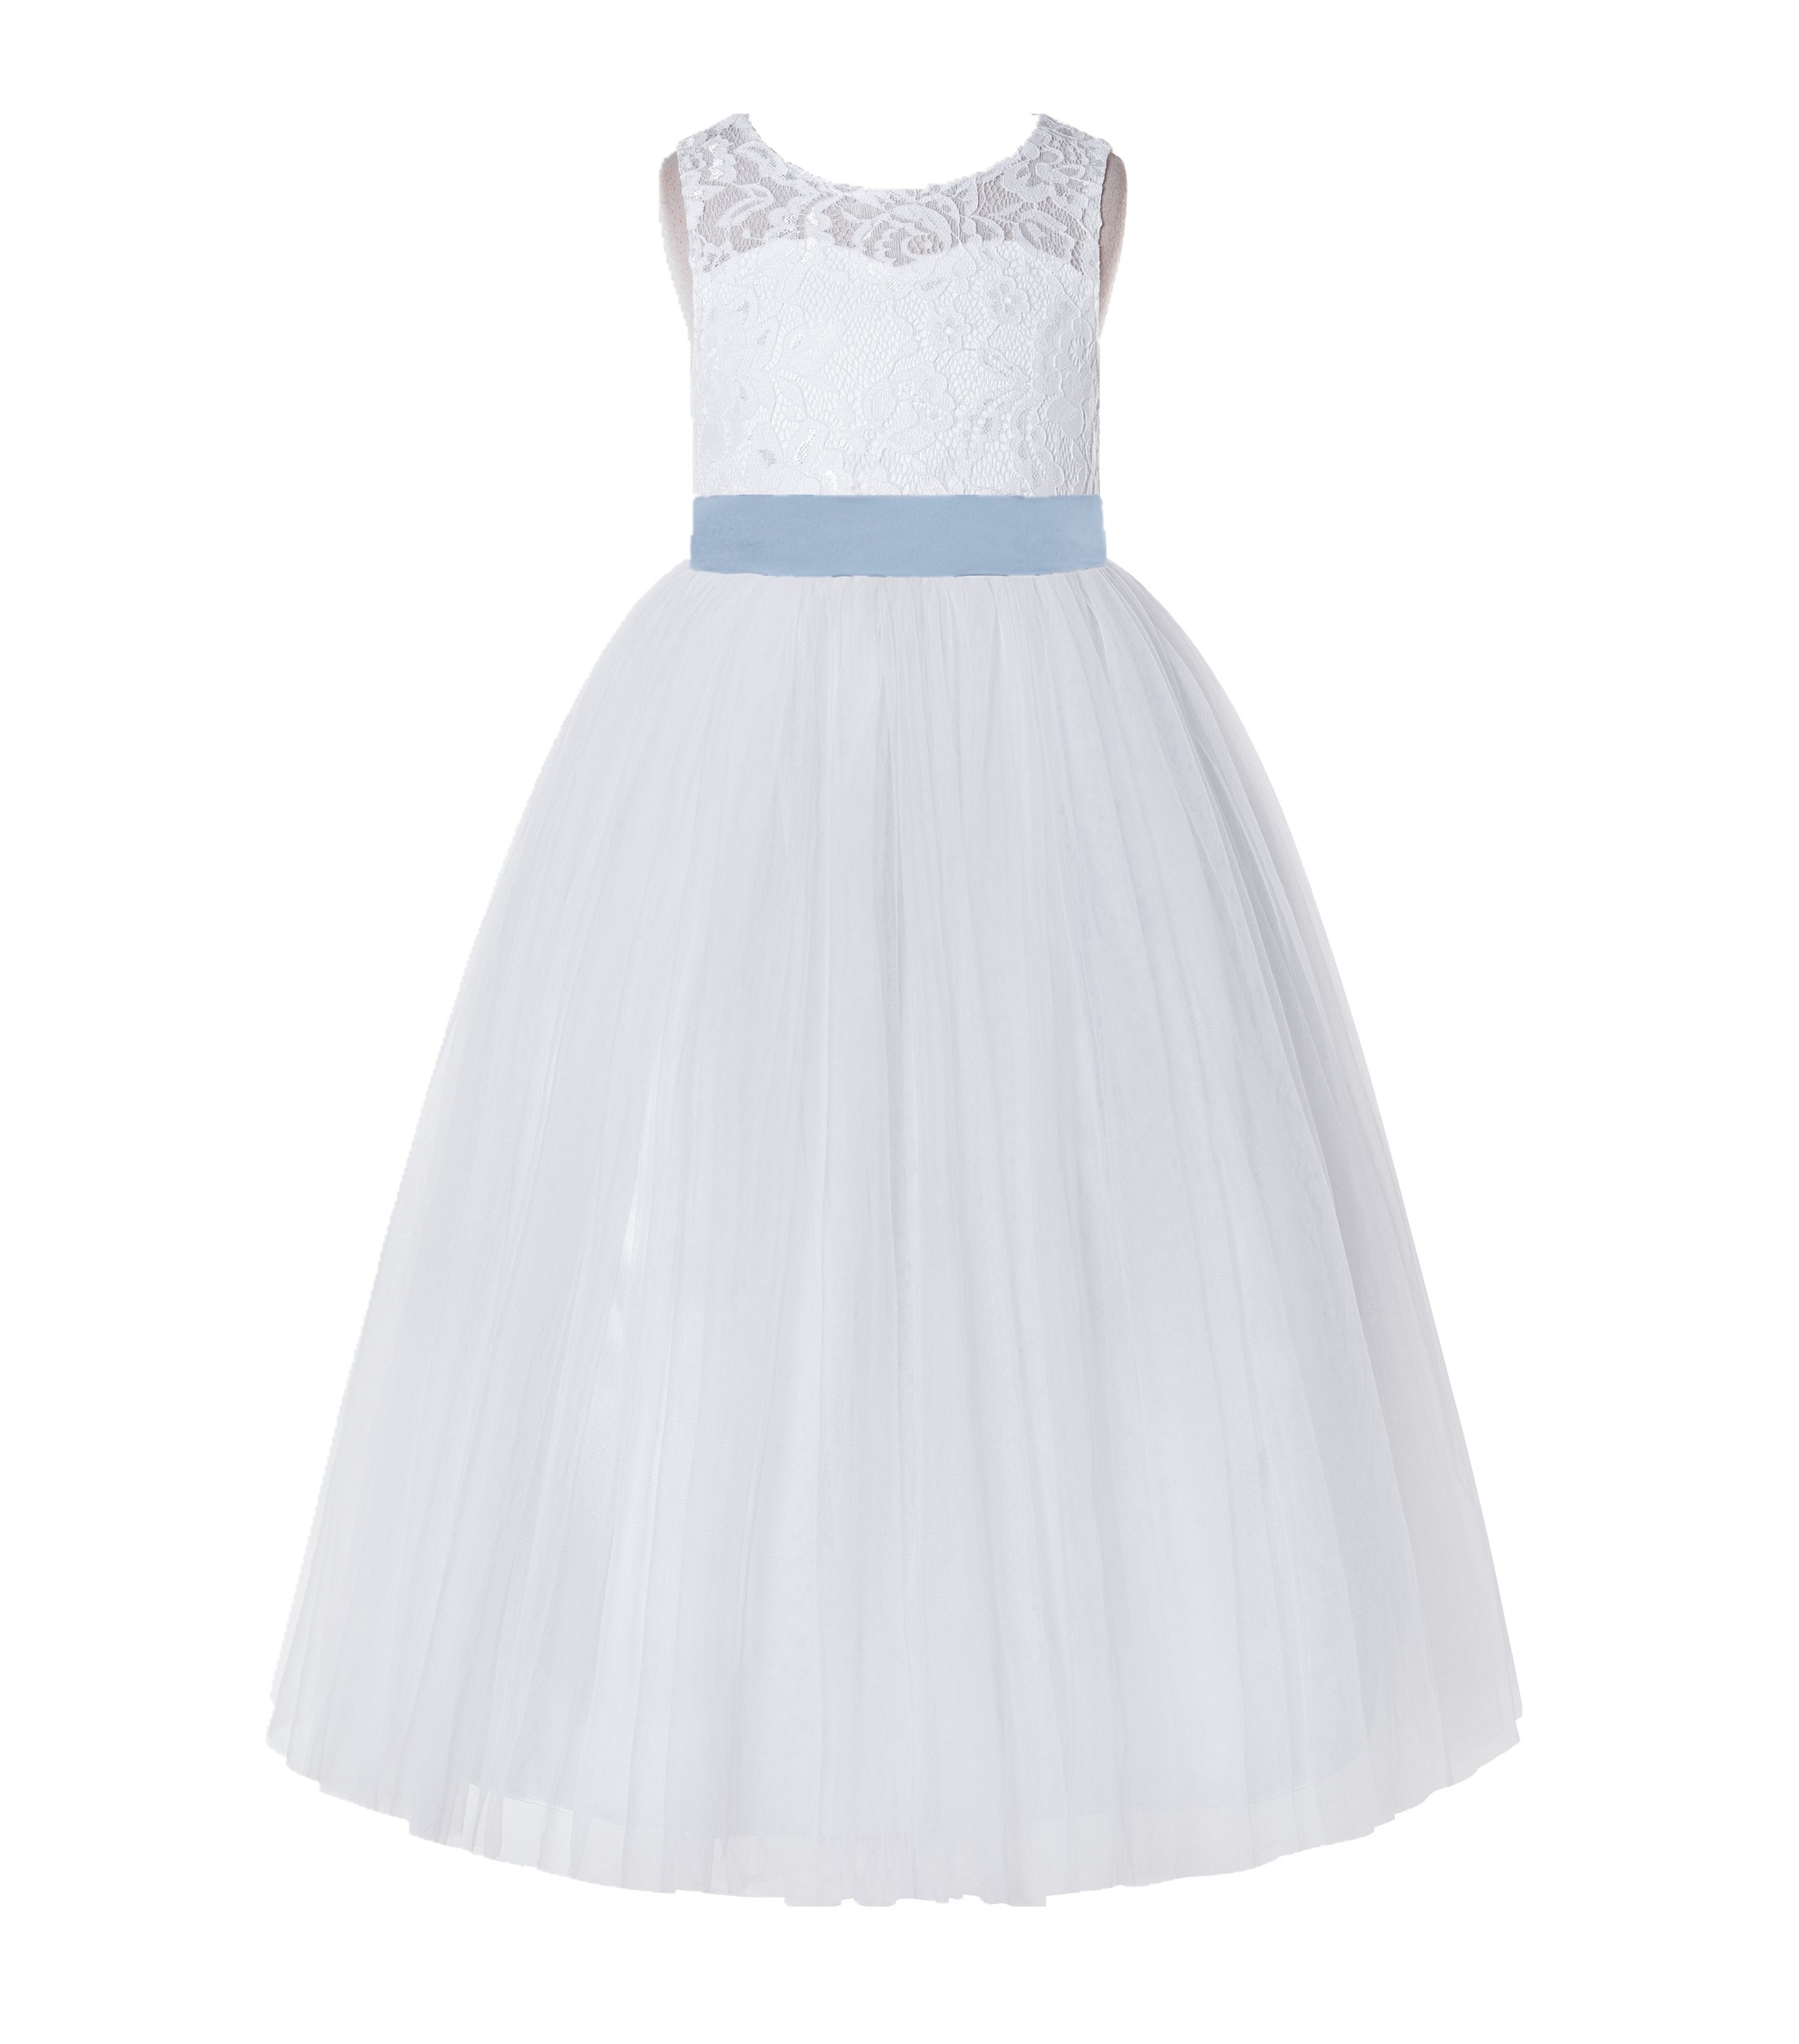 White / Dusty Blue Tulle A-Line Lace Flower Girl Dress 178